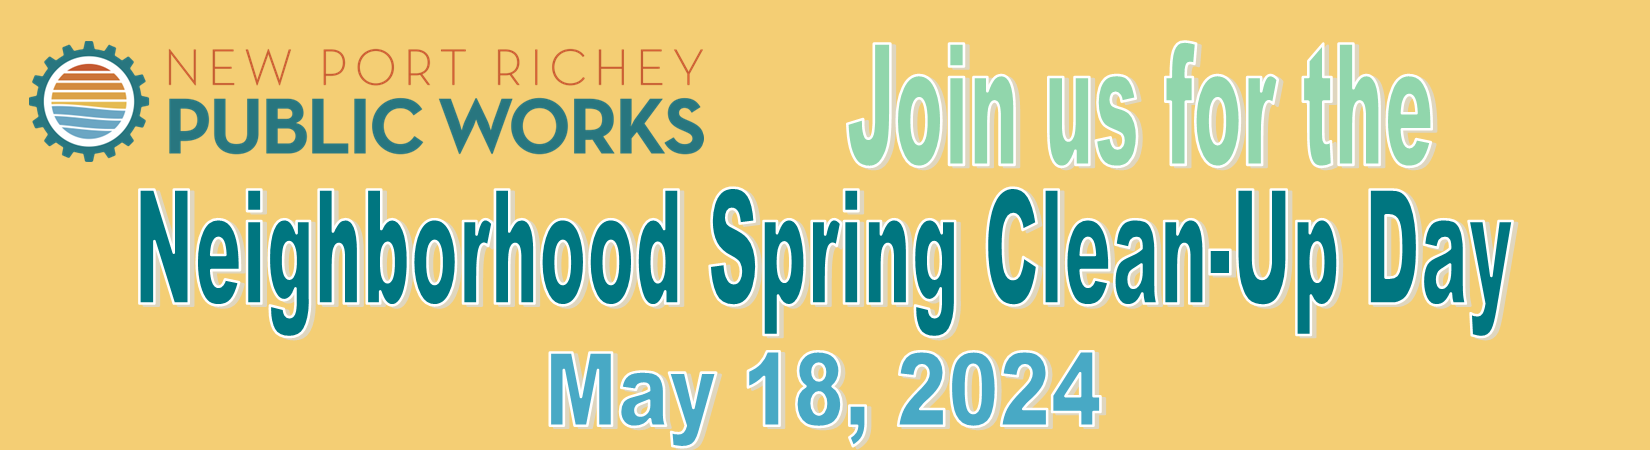 Join us for the Neighborhood Spring Clean-Up Day May 18, 2024